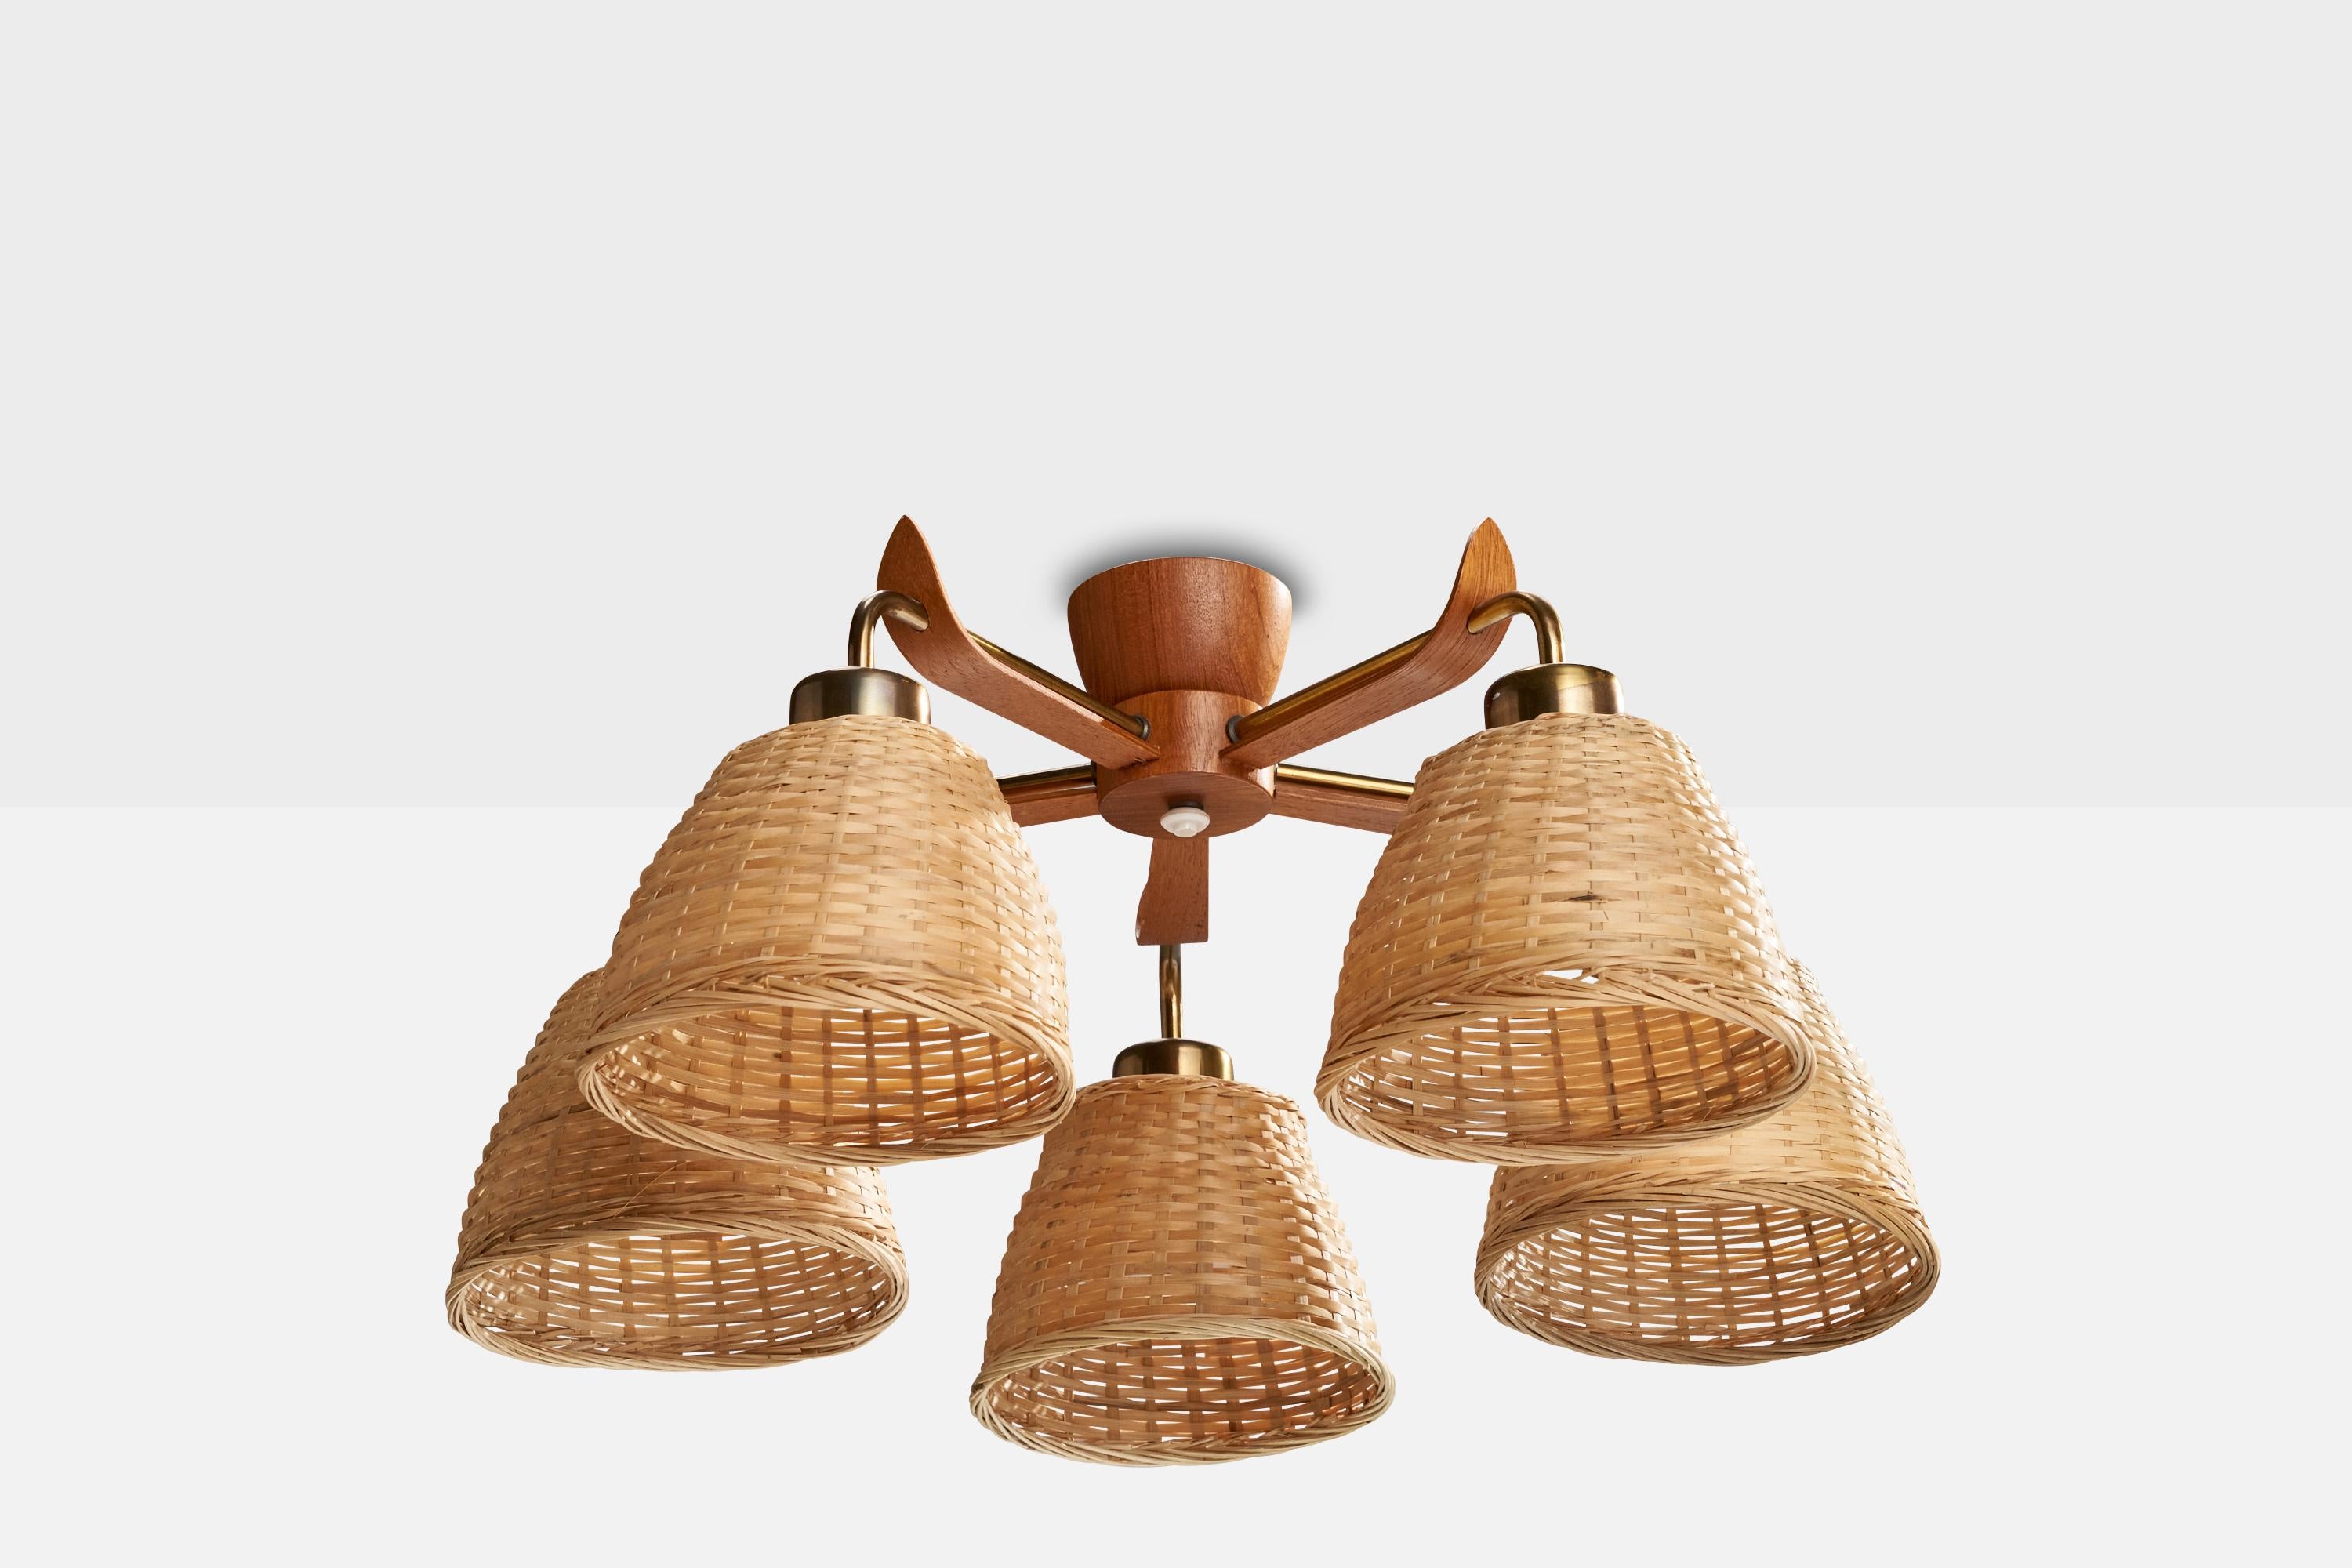 A teak, brass and rattan chandelier designed and produced in Sweden, c. 1950s.

Dimensions of canopy (inches): 3.5” H x 2.08” Diameter
Socket takes standard E-26 bulbs. 5 socket.There is no maximum wattage stated on the fixture. All lighting will be